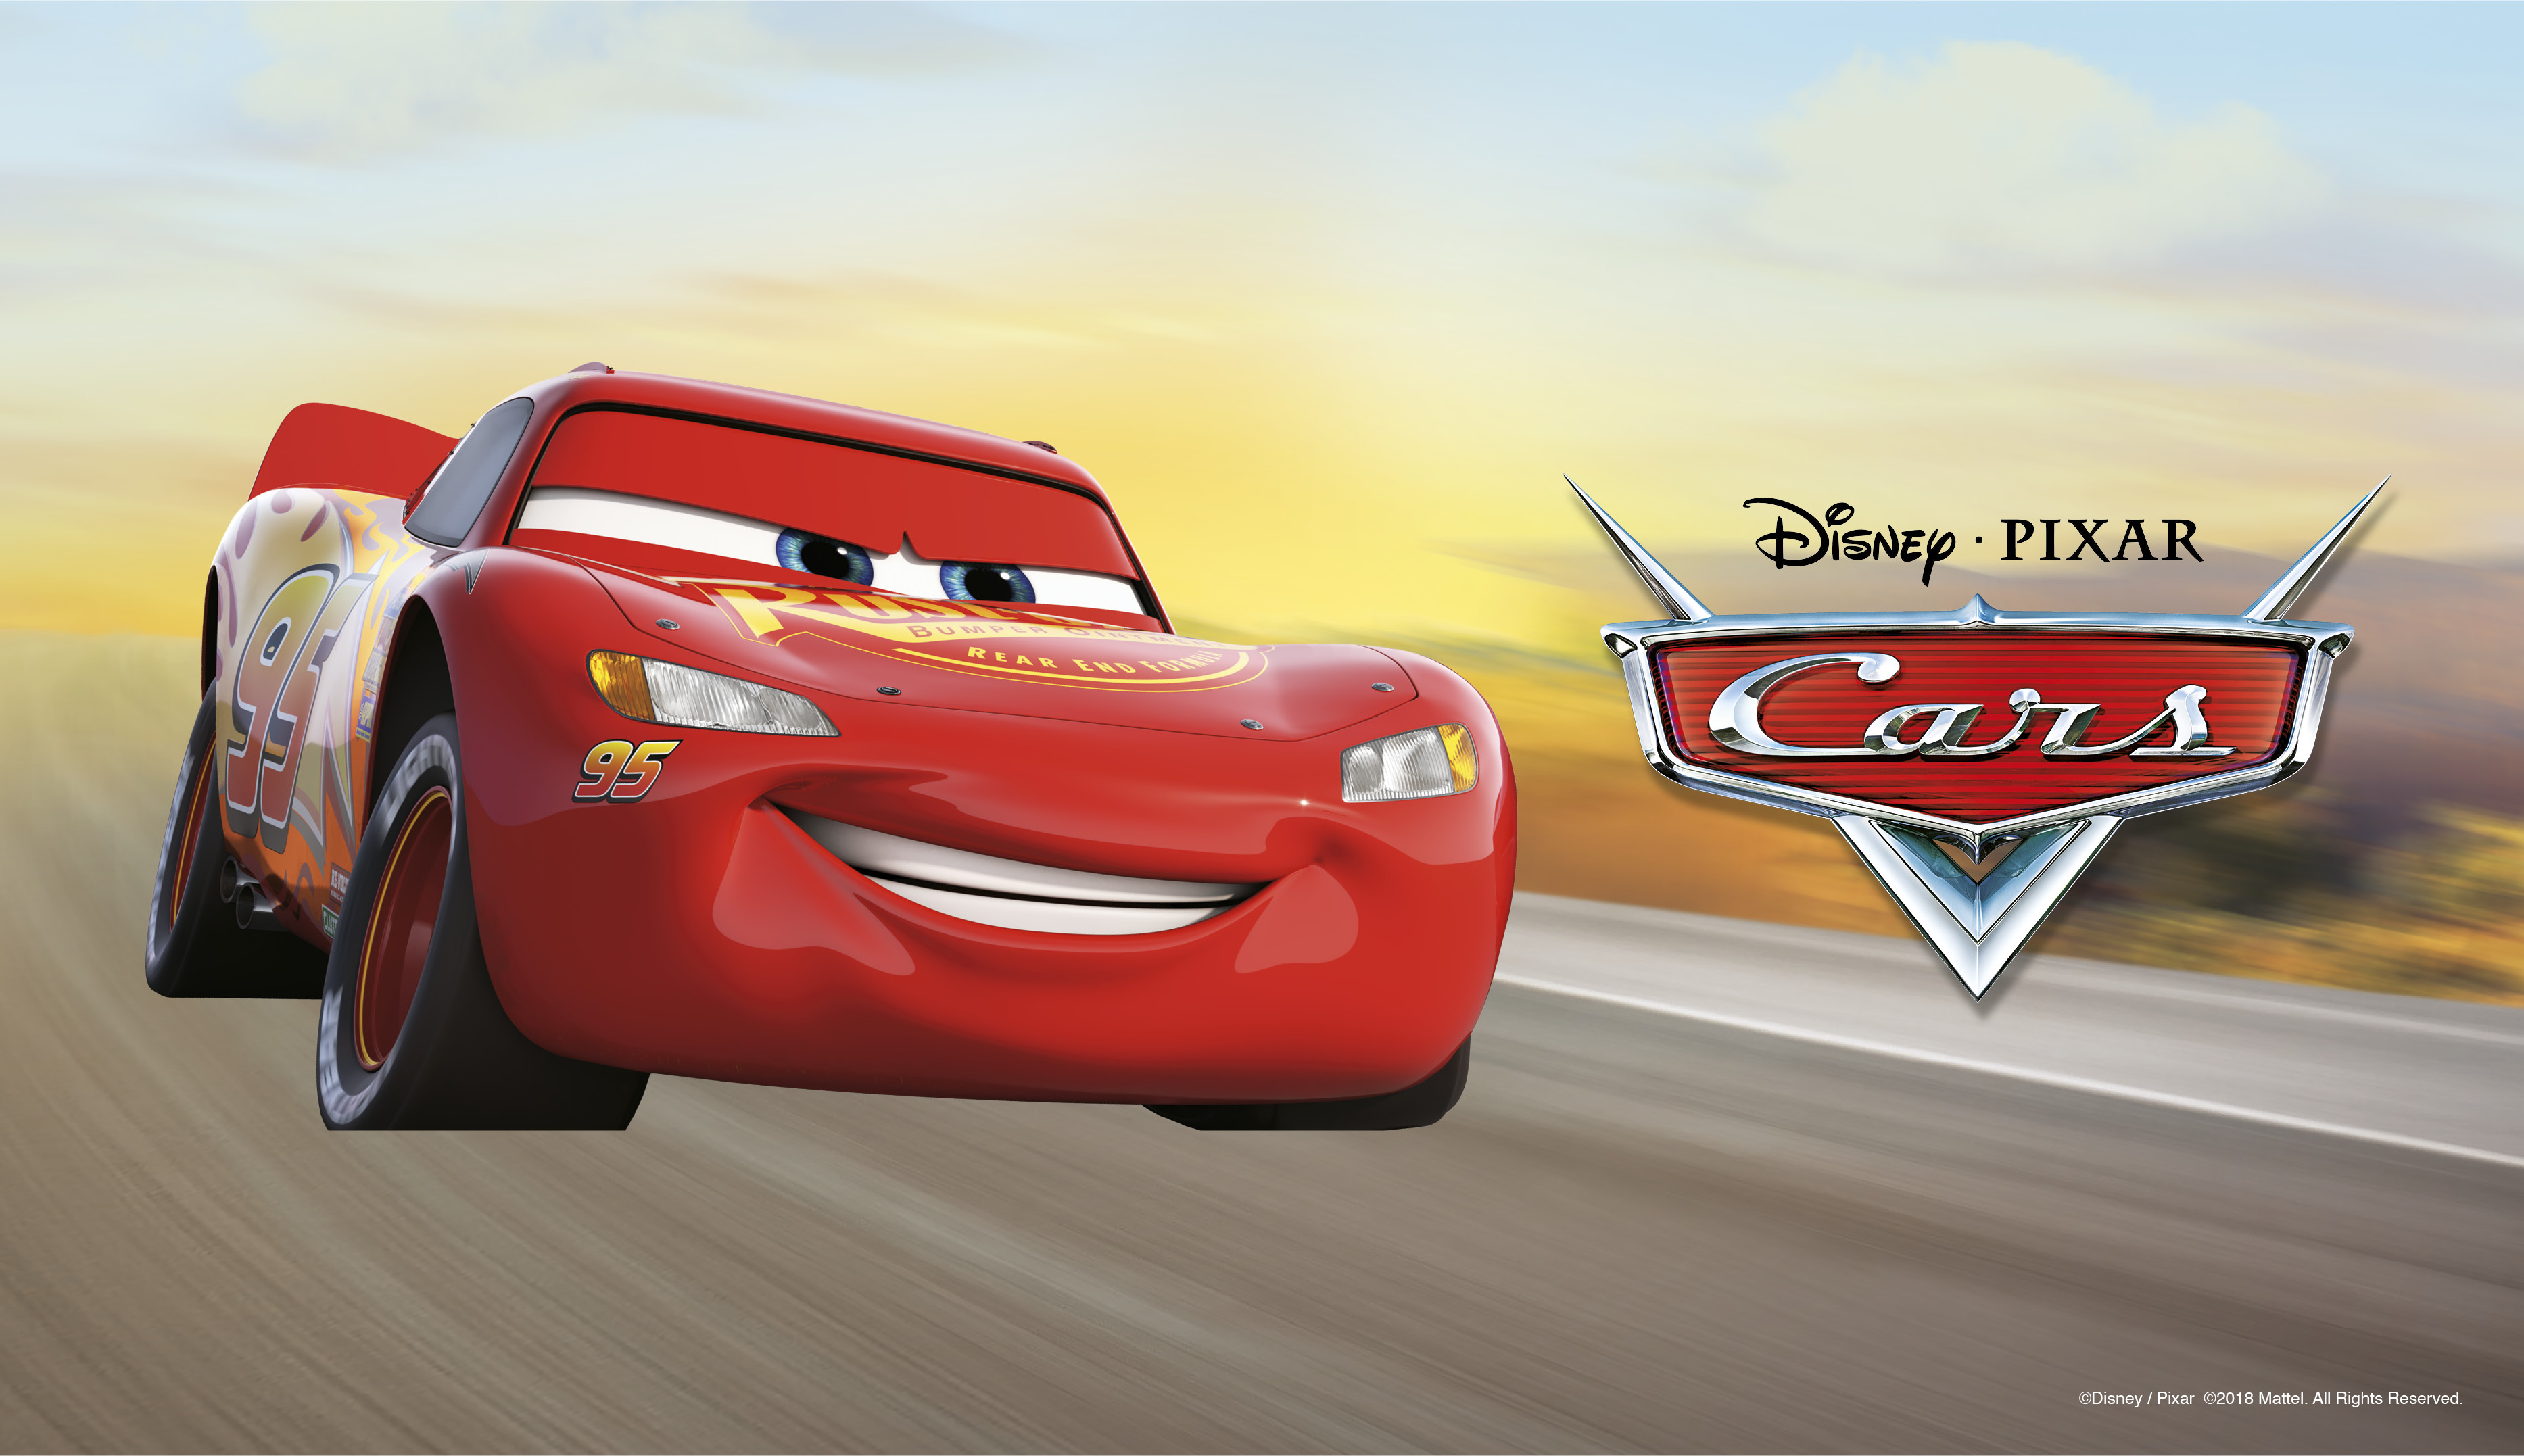 Disney Cars - Whose car is the fastest? And who excels in jumping?